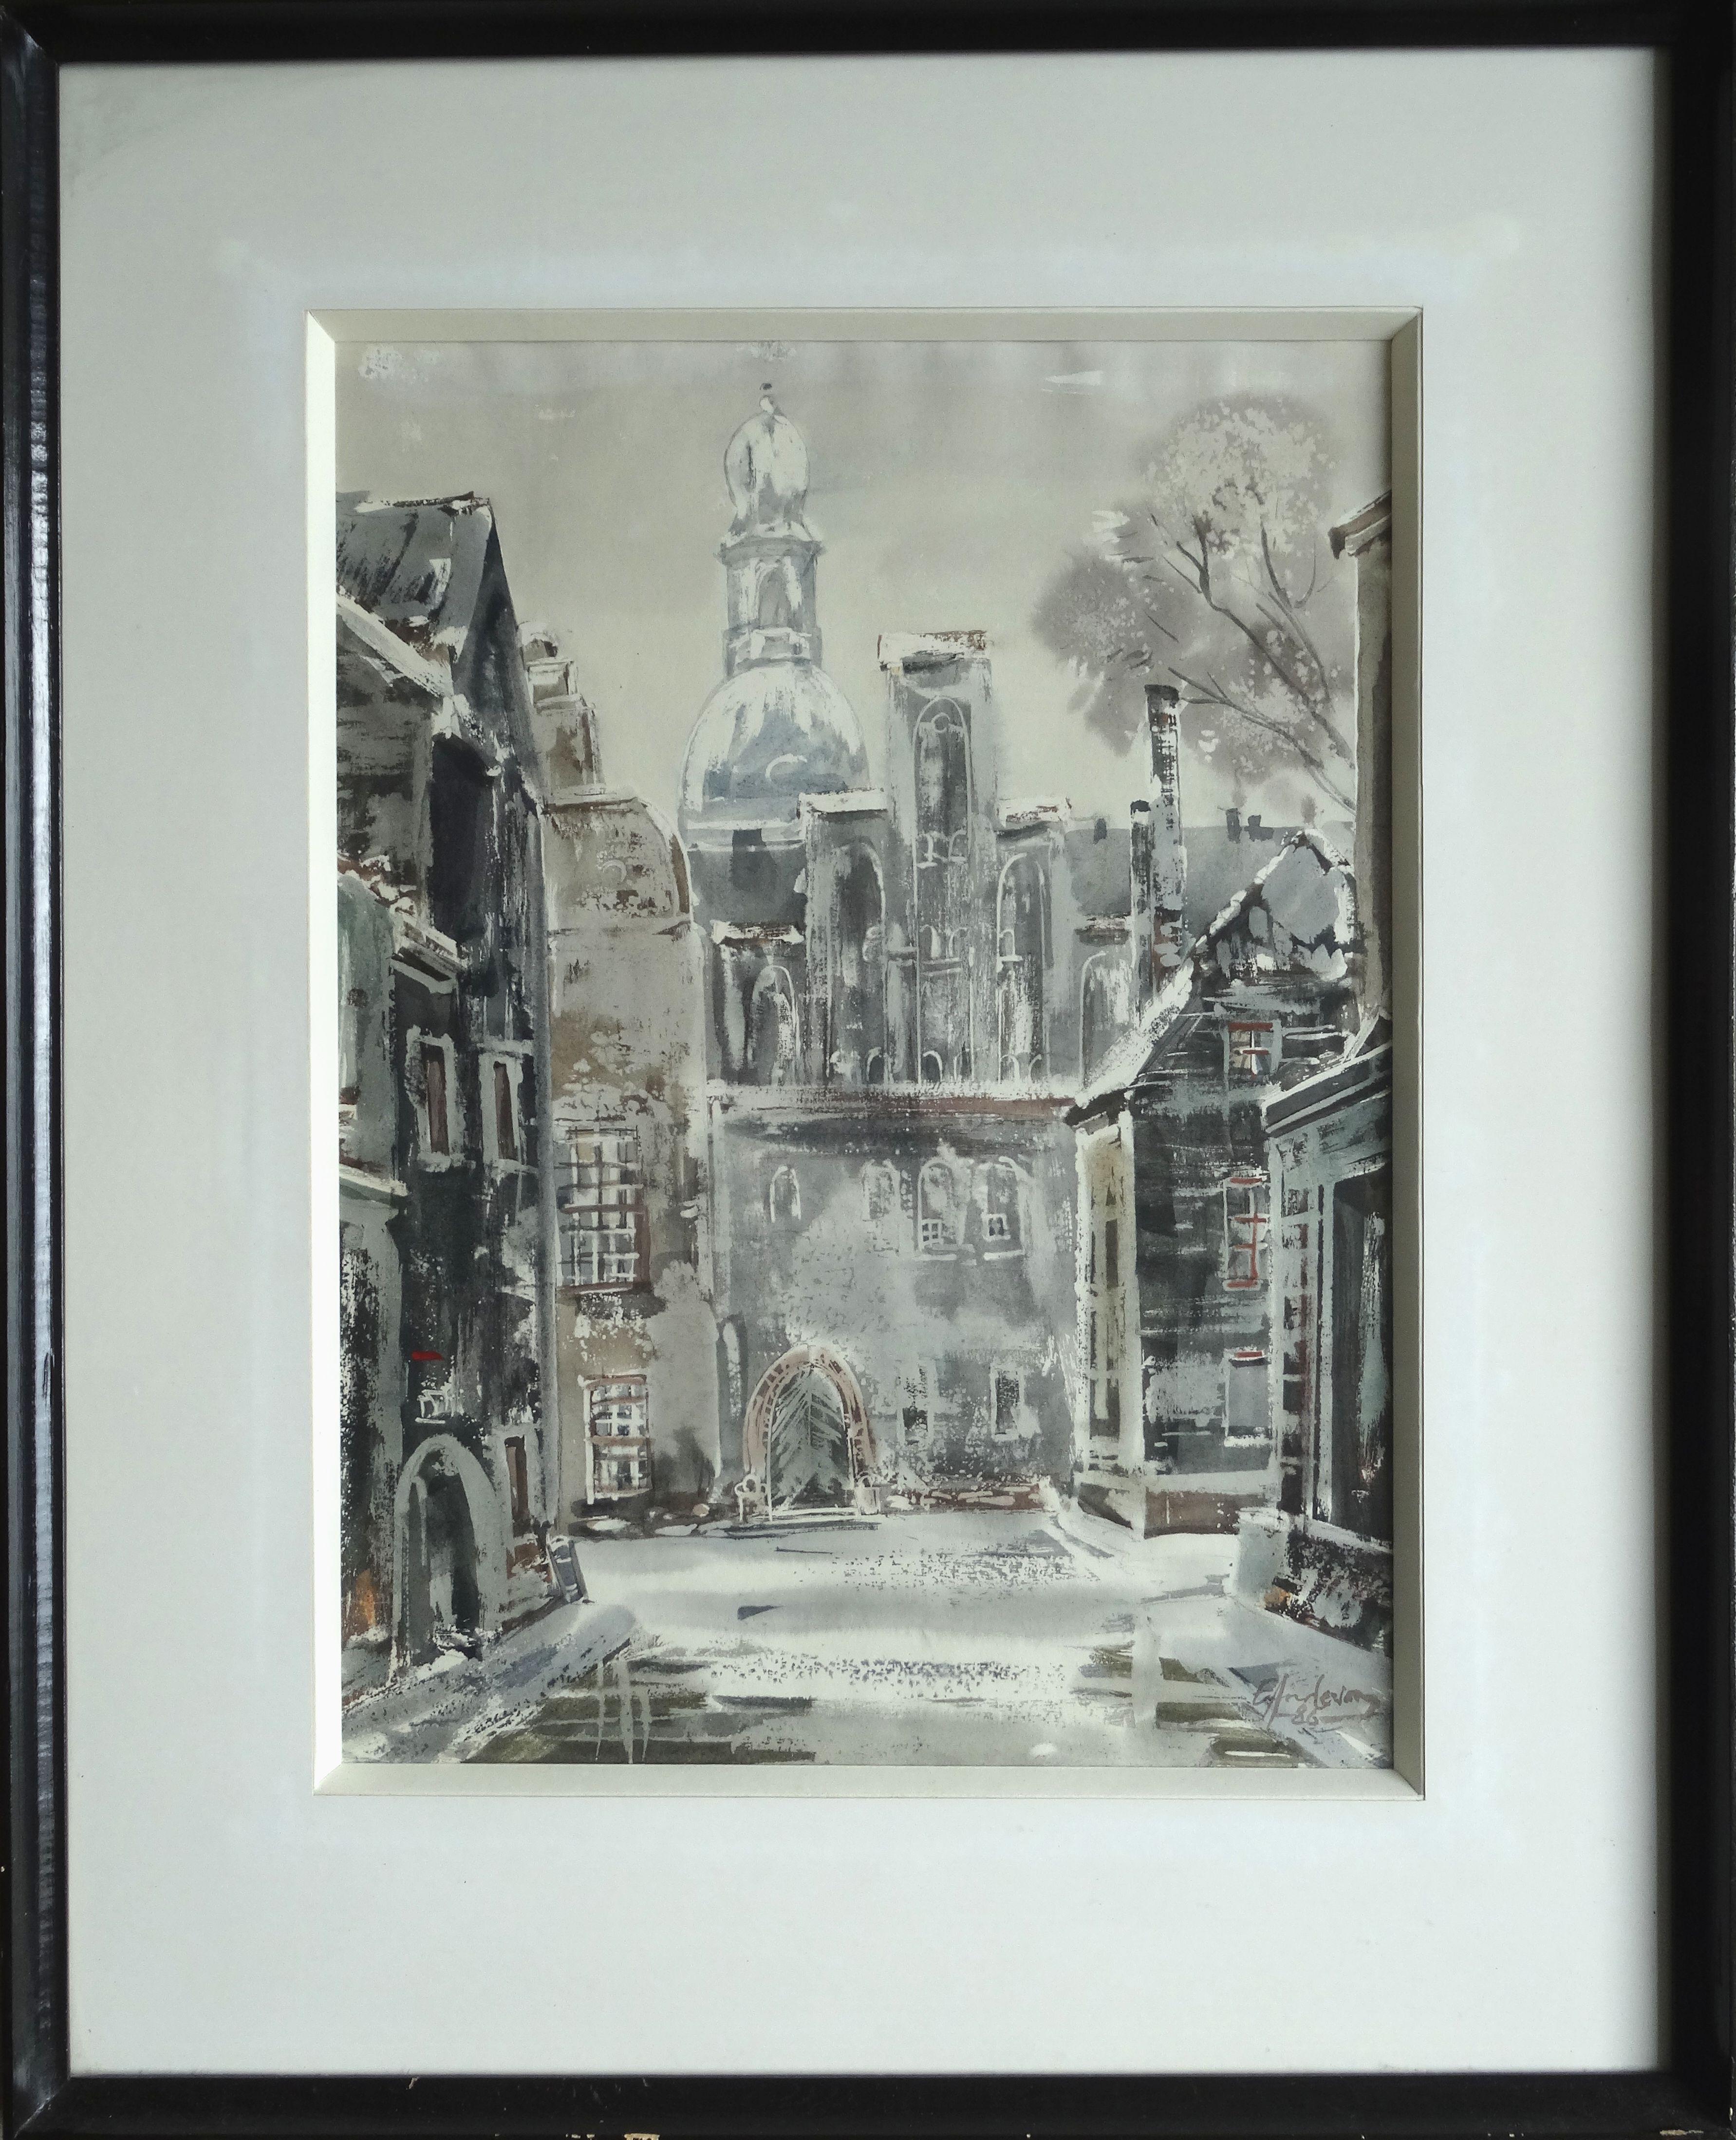 Old City. 1986. Paper, watercolor, 47x34 cm - Painting by Edwin Andersons